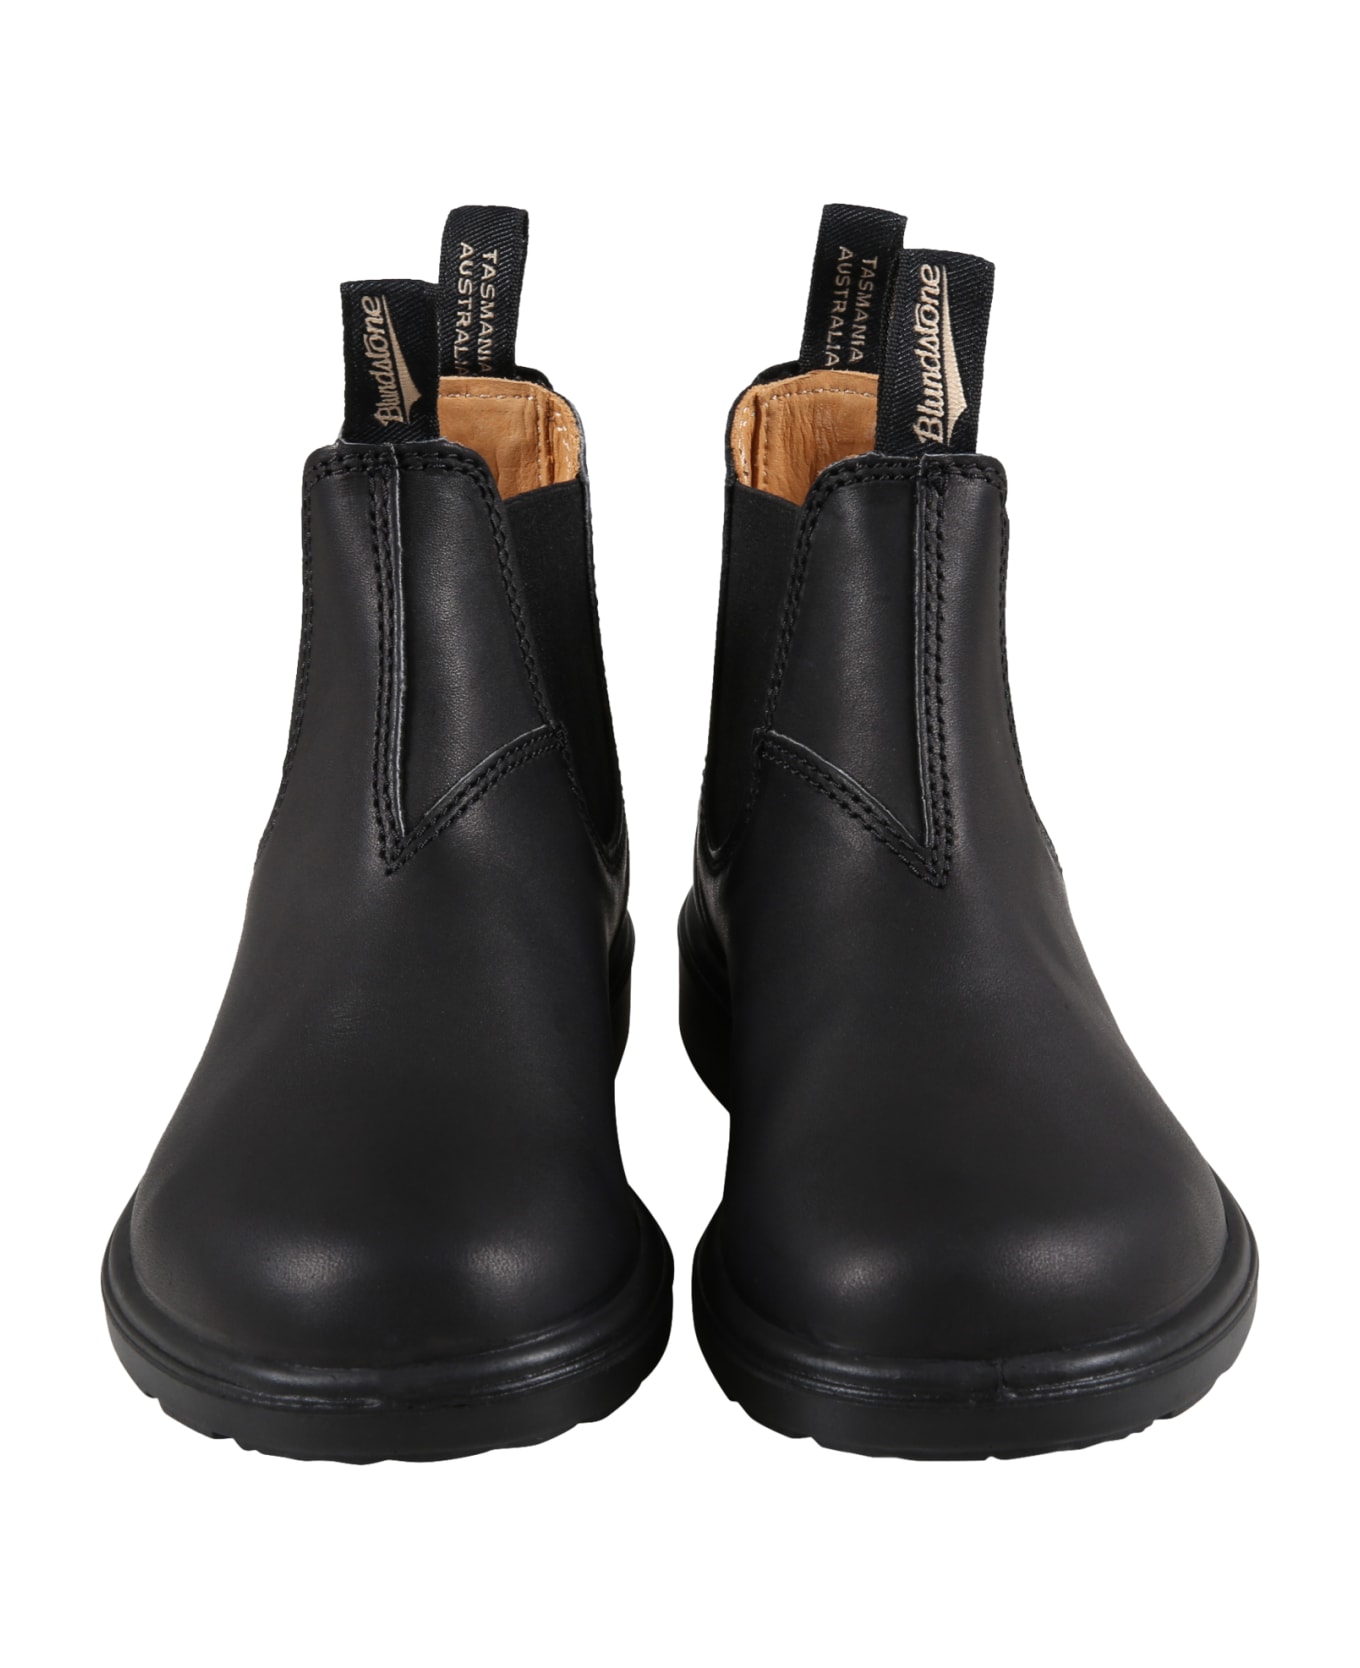 Blundstone Black Boots For Boy With Logo - Black